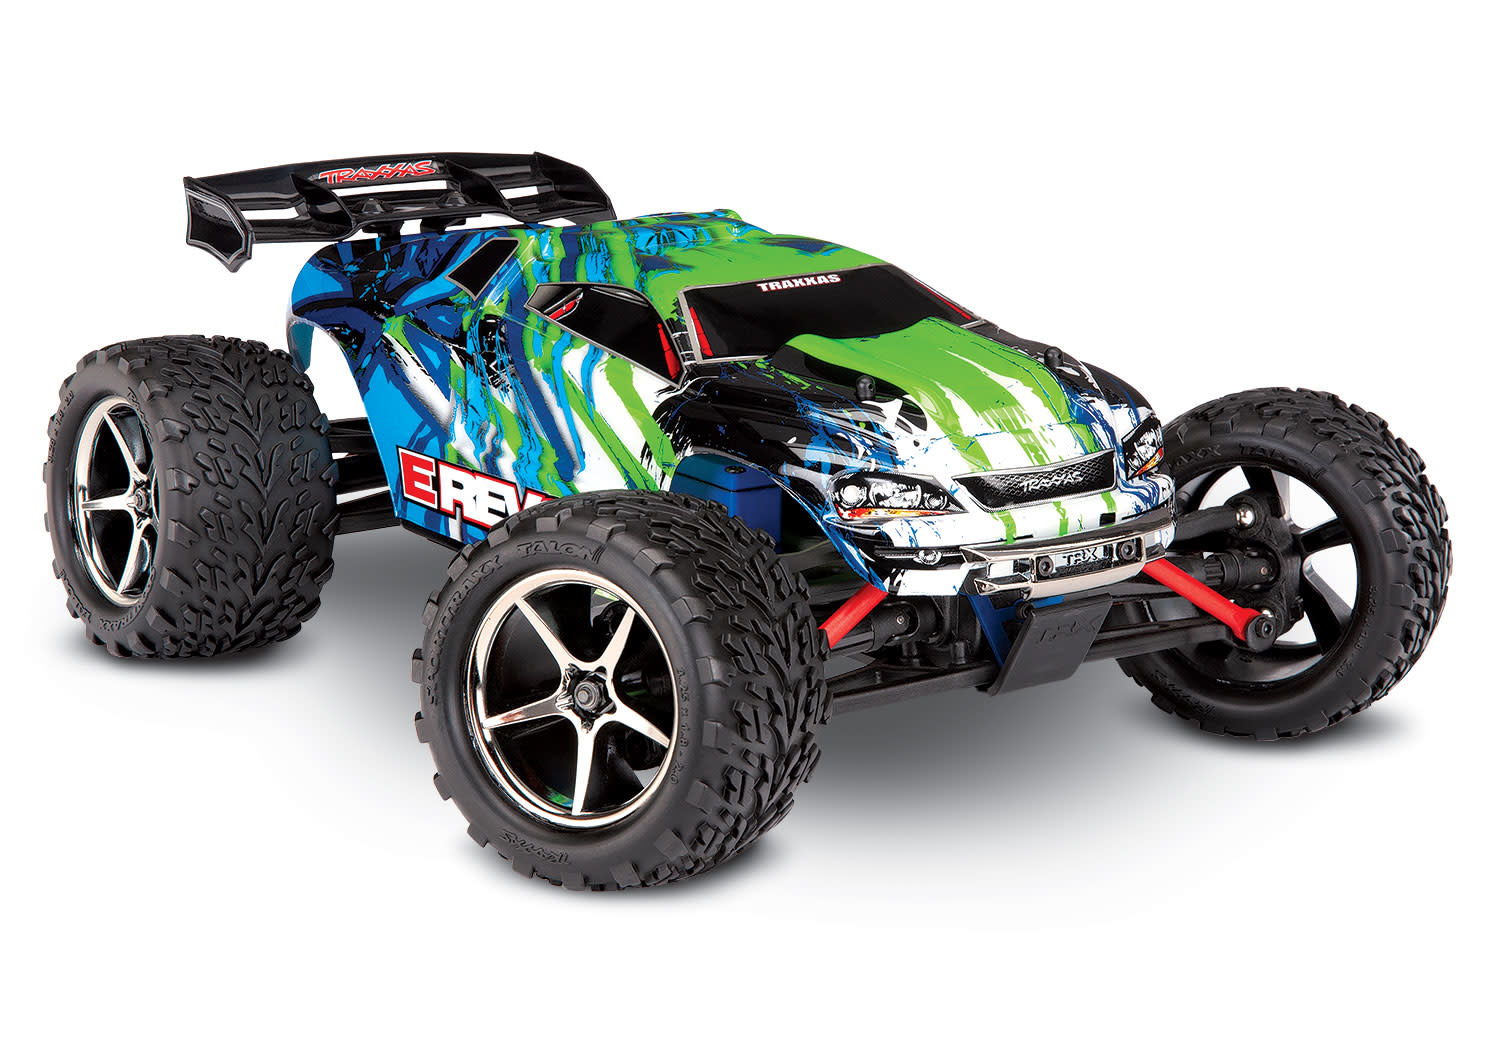 Traxxas 71054-1-GRN E-Revo®: 1/16 Scale 4WD Electric Racing Monster Truck. Ready-To-Race® with TQ 2.4GHz radio system, Titan® 550 motor and XL-2.5 ESC. Includes: 6-Cell NiMH 1200mAh Traxxas® battery